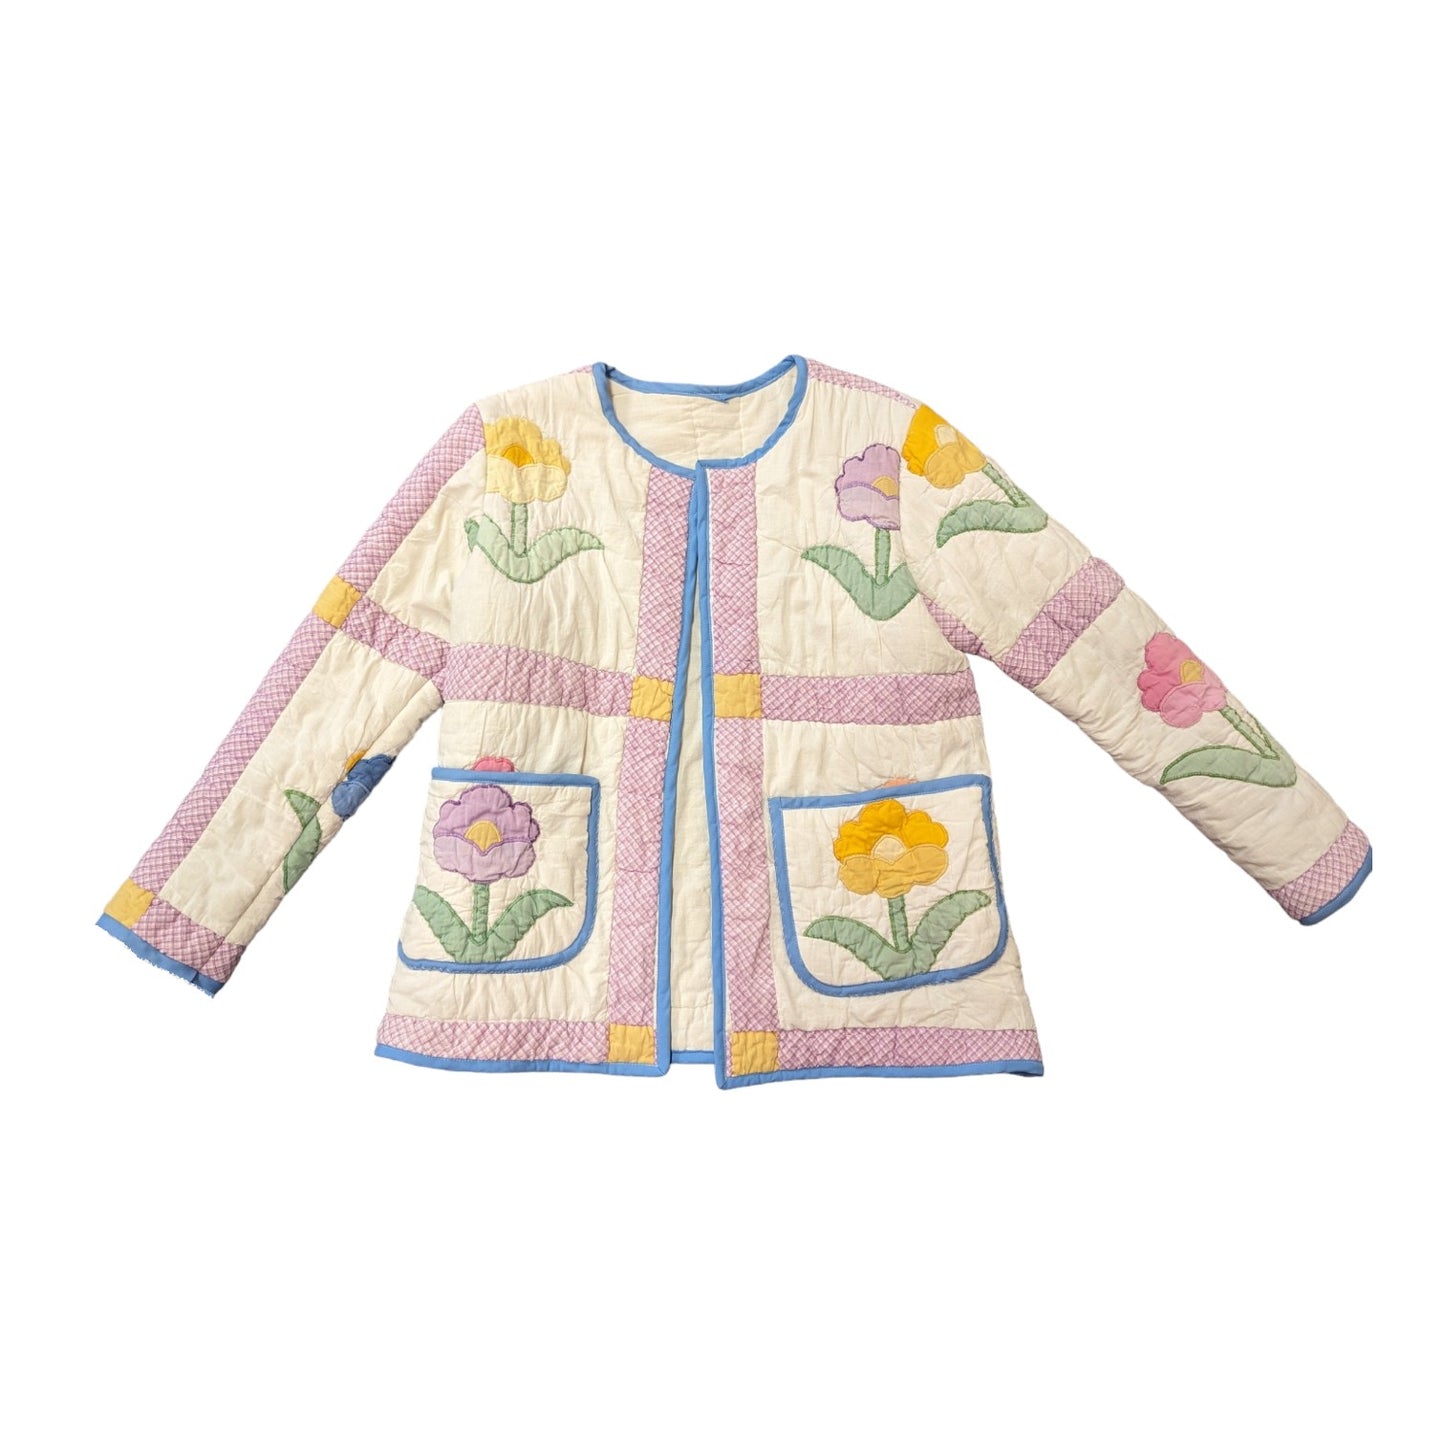 In The Garden Quilt Coat by A.Thimbleberry